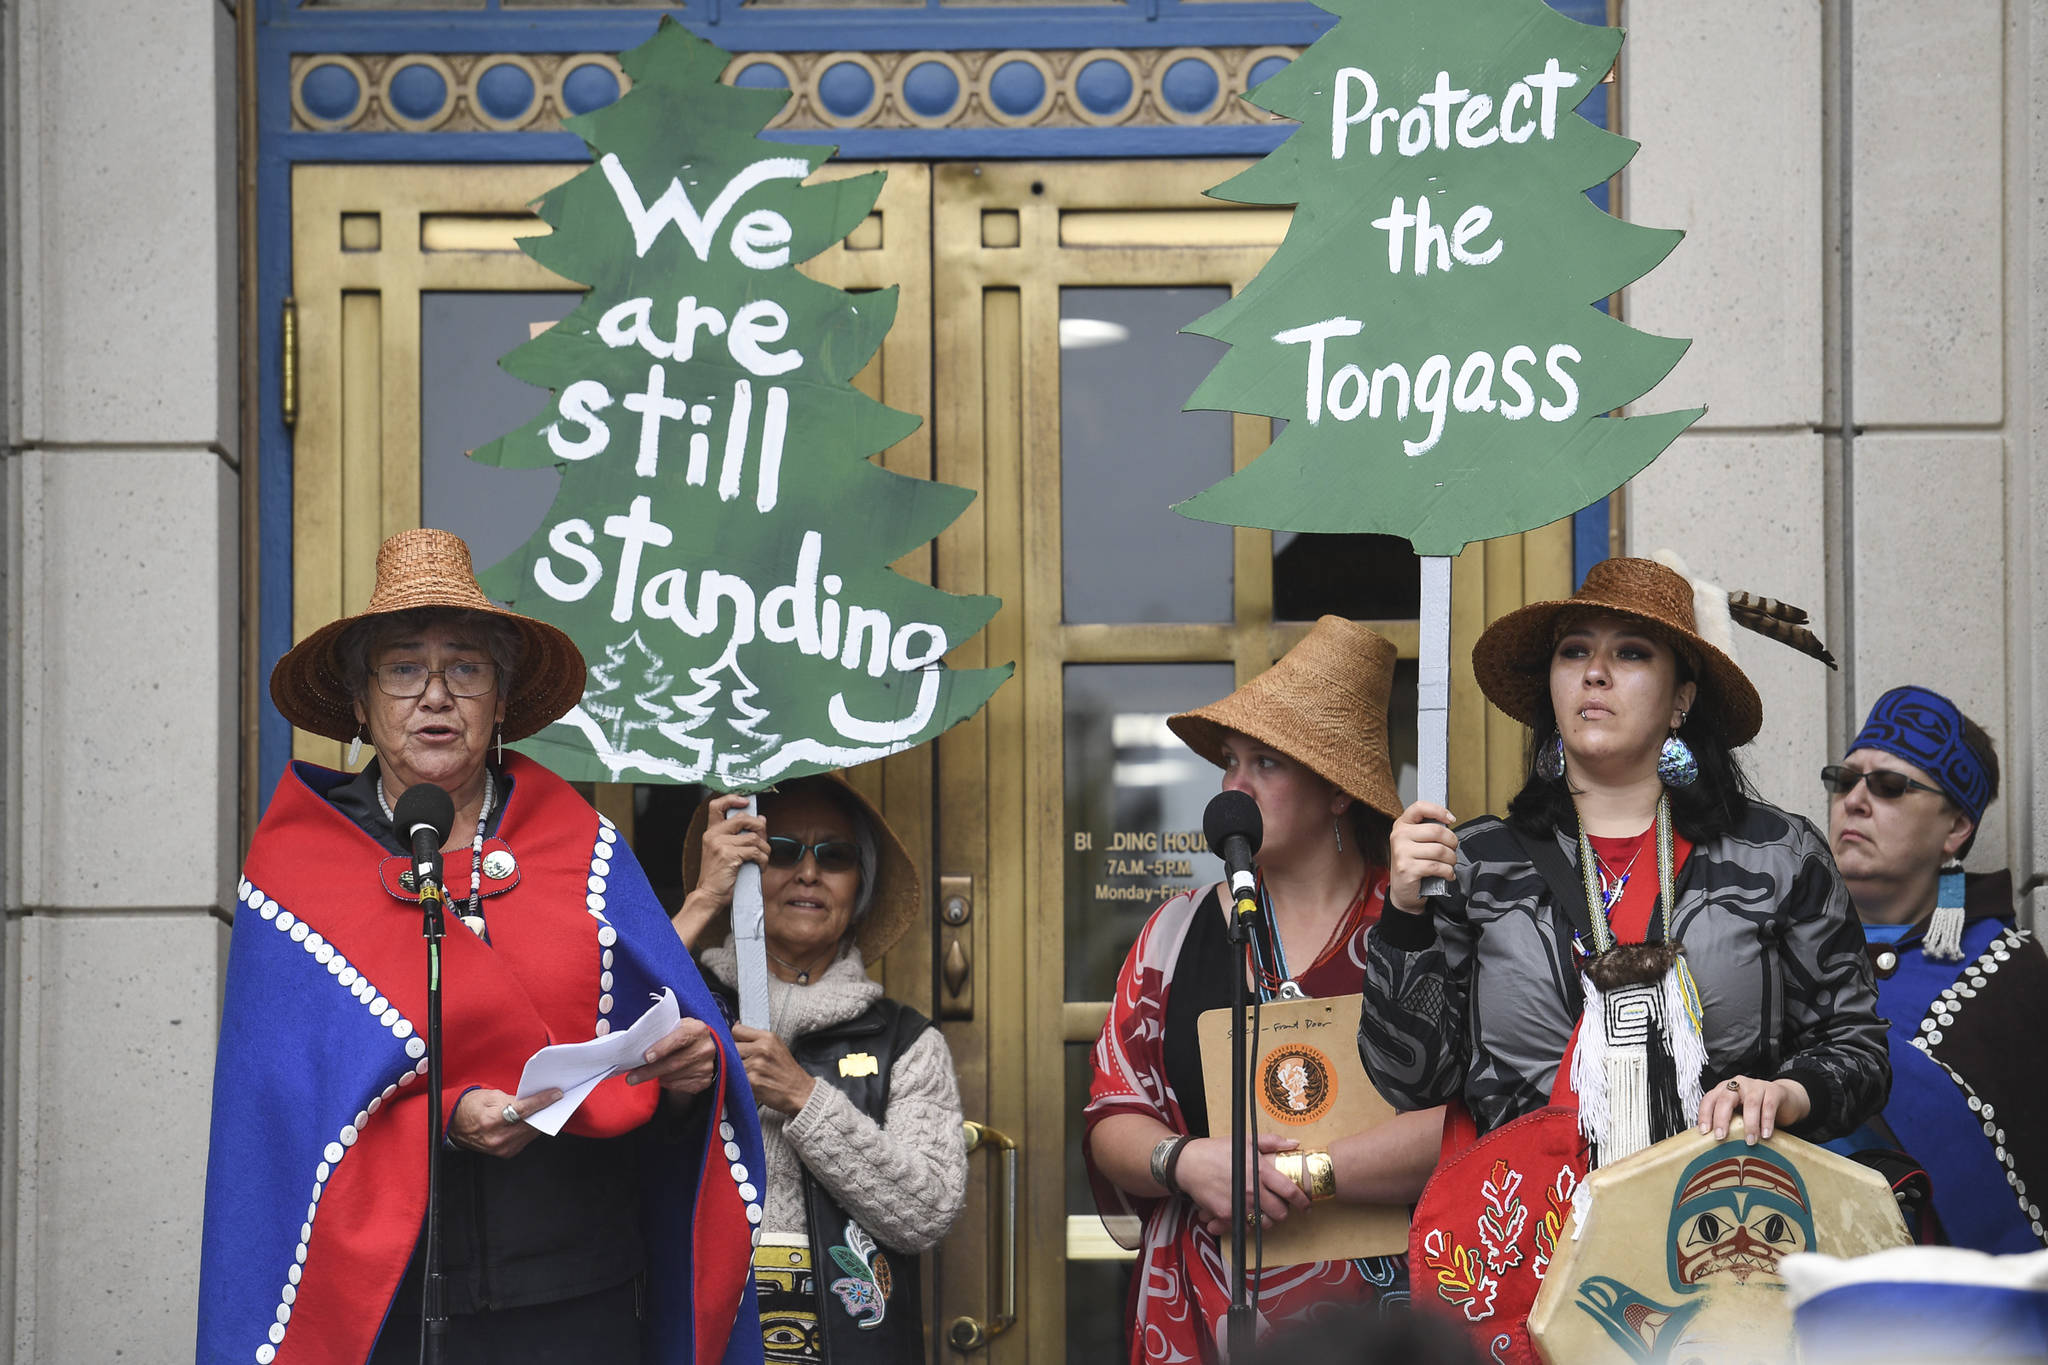 Wanda “Kashudoha” Loescher Culp, Tlingit activist and WECAN Tongass Coordinator, speaks during a Tongass Rally to show local support for the 2001 National Roadless Rule in front of the Alaska State Capitol on Saturday, June 22, 2019. (Michael Penn | Juneau Empire)